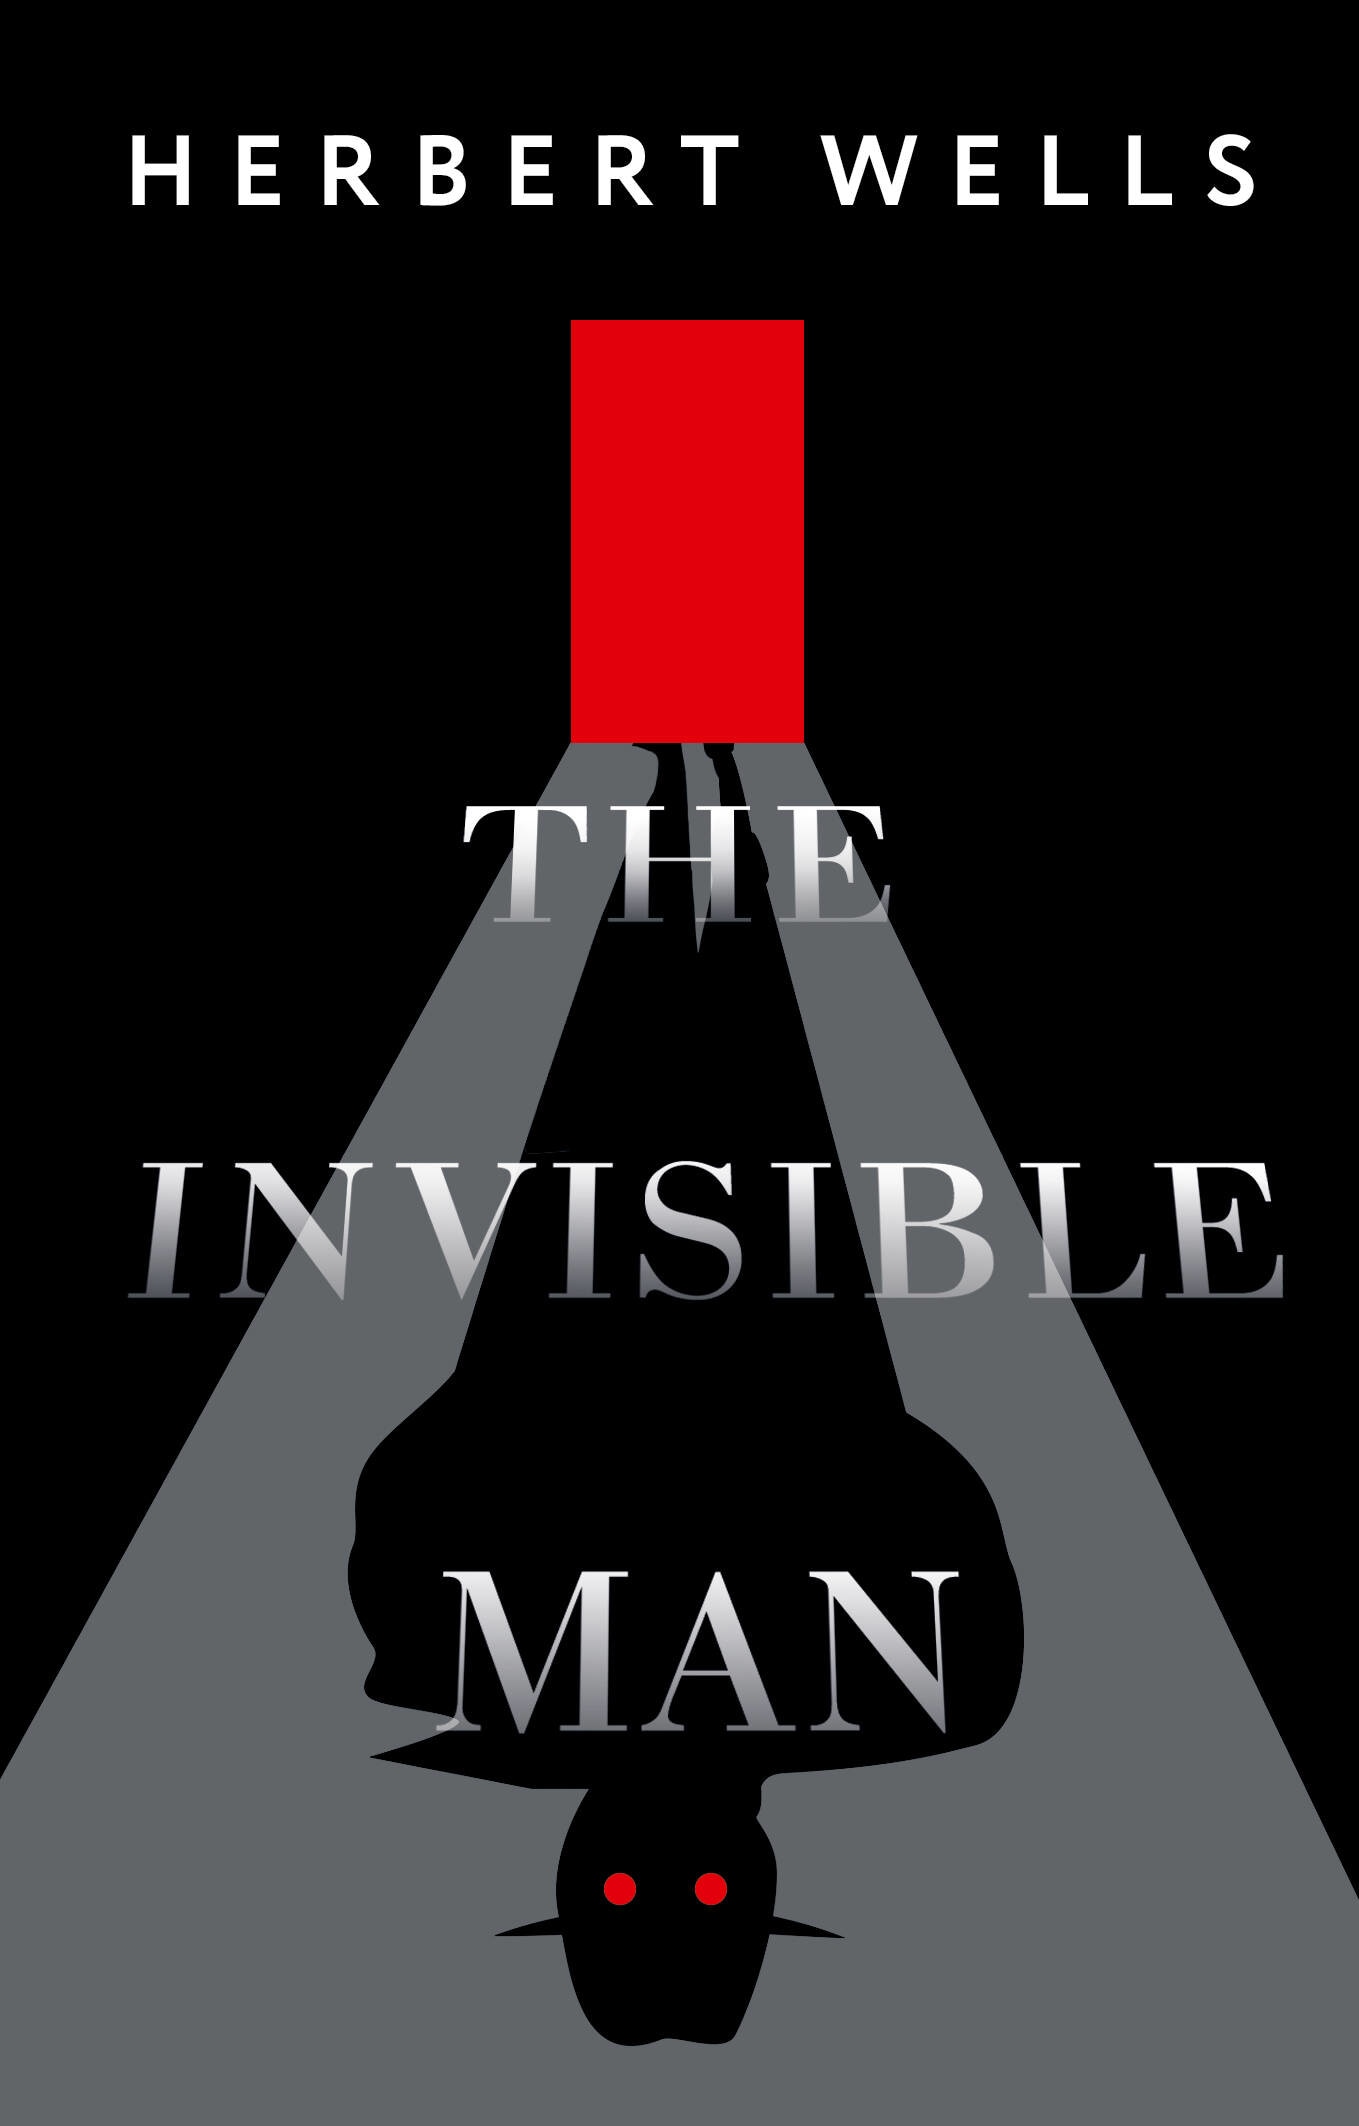 Book “The Invisible Man” by Уэллс Герберт Джордж — 2023